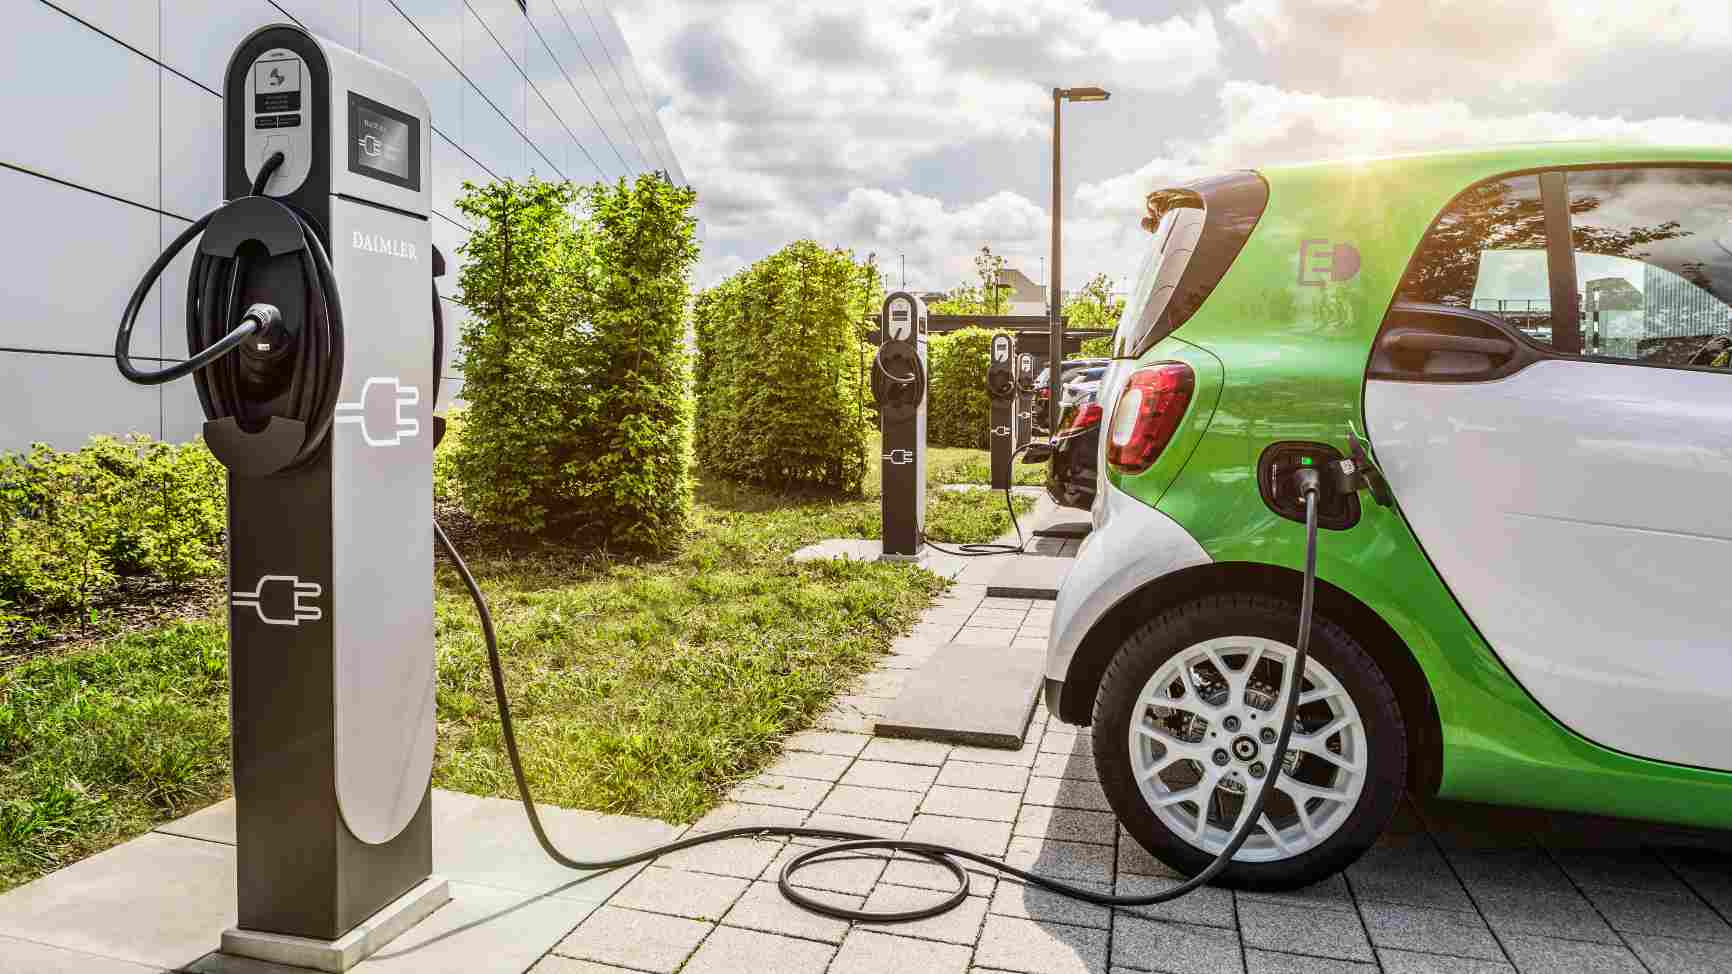 Kerala to have 100 EV charging stations by end2021, govt departments